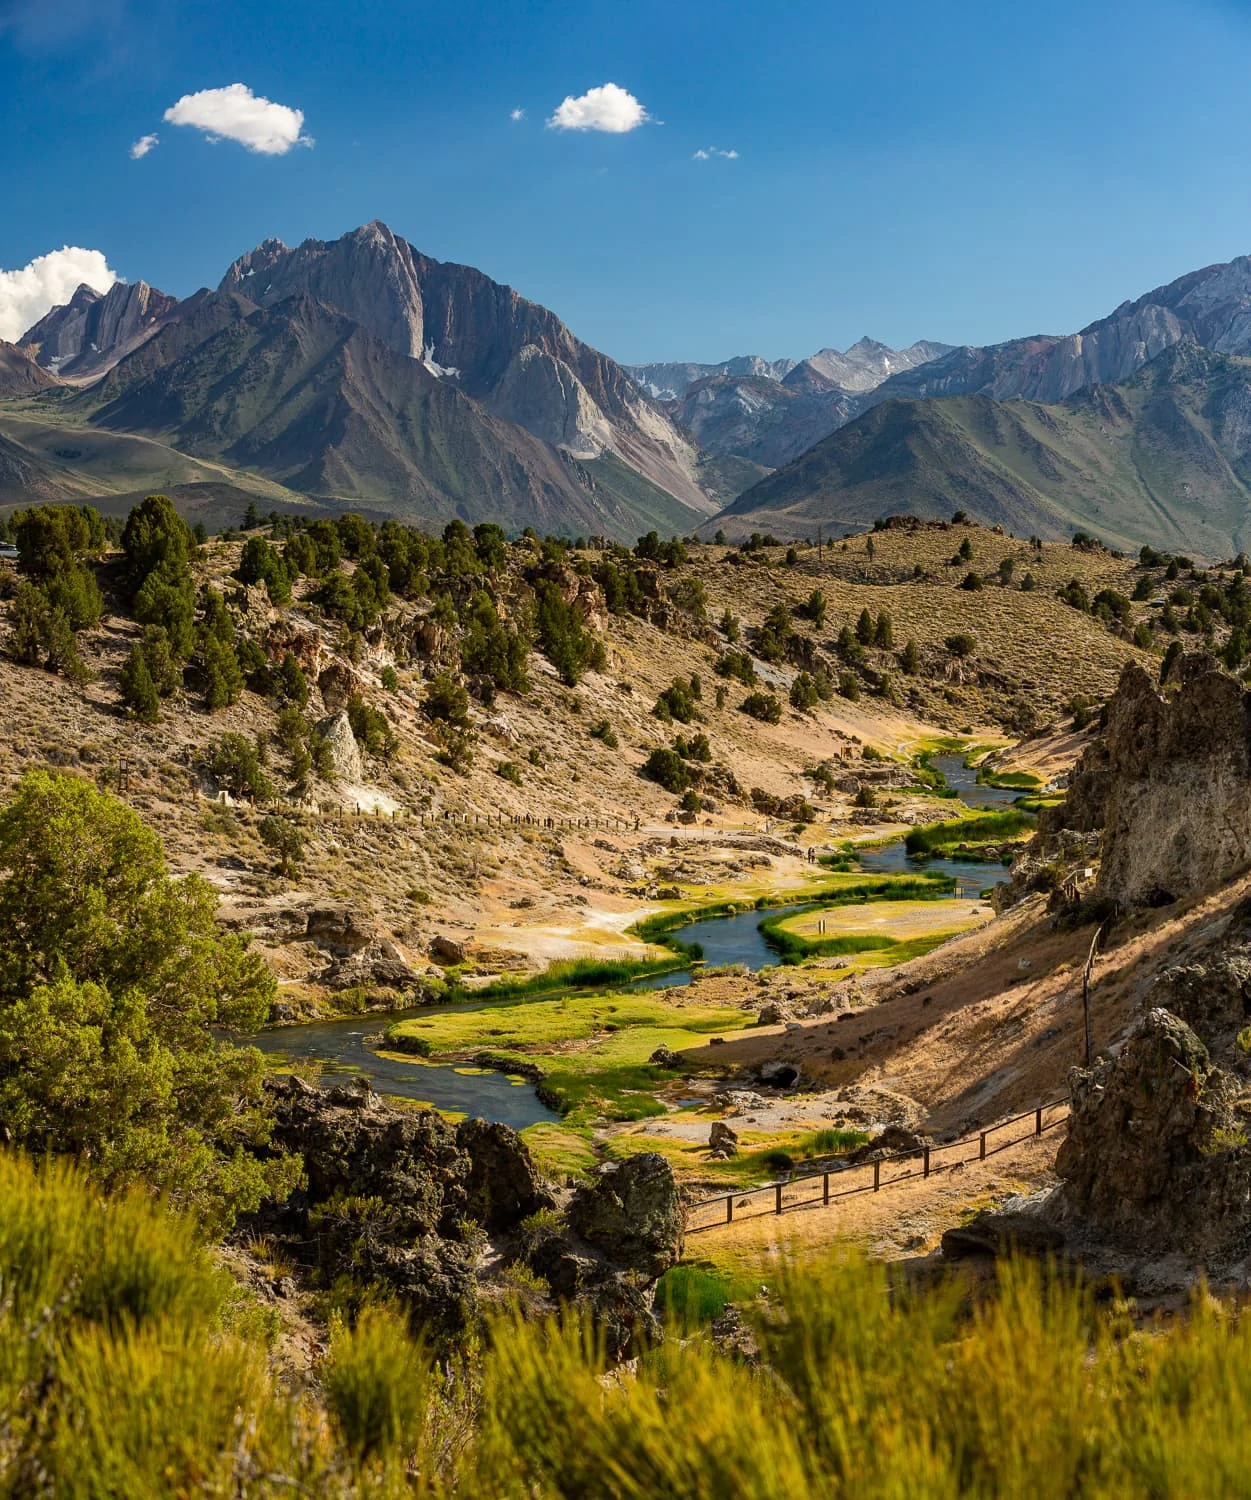 A colorful landscape photo looking west over the winding hot creek with mammoth mountain in the background.